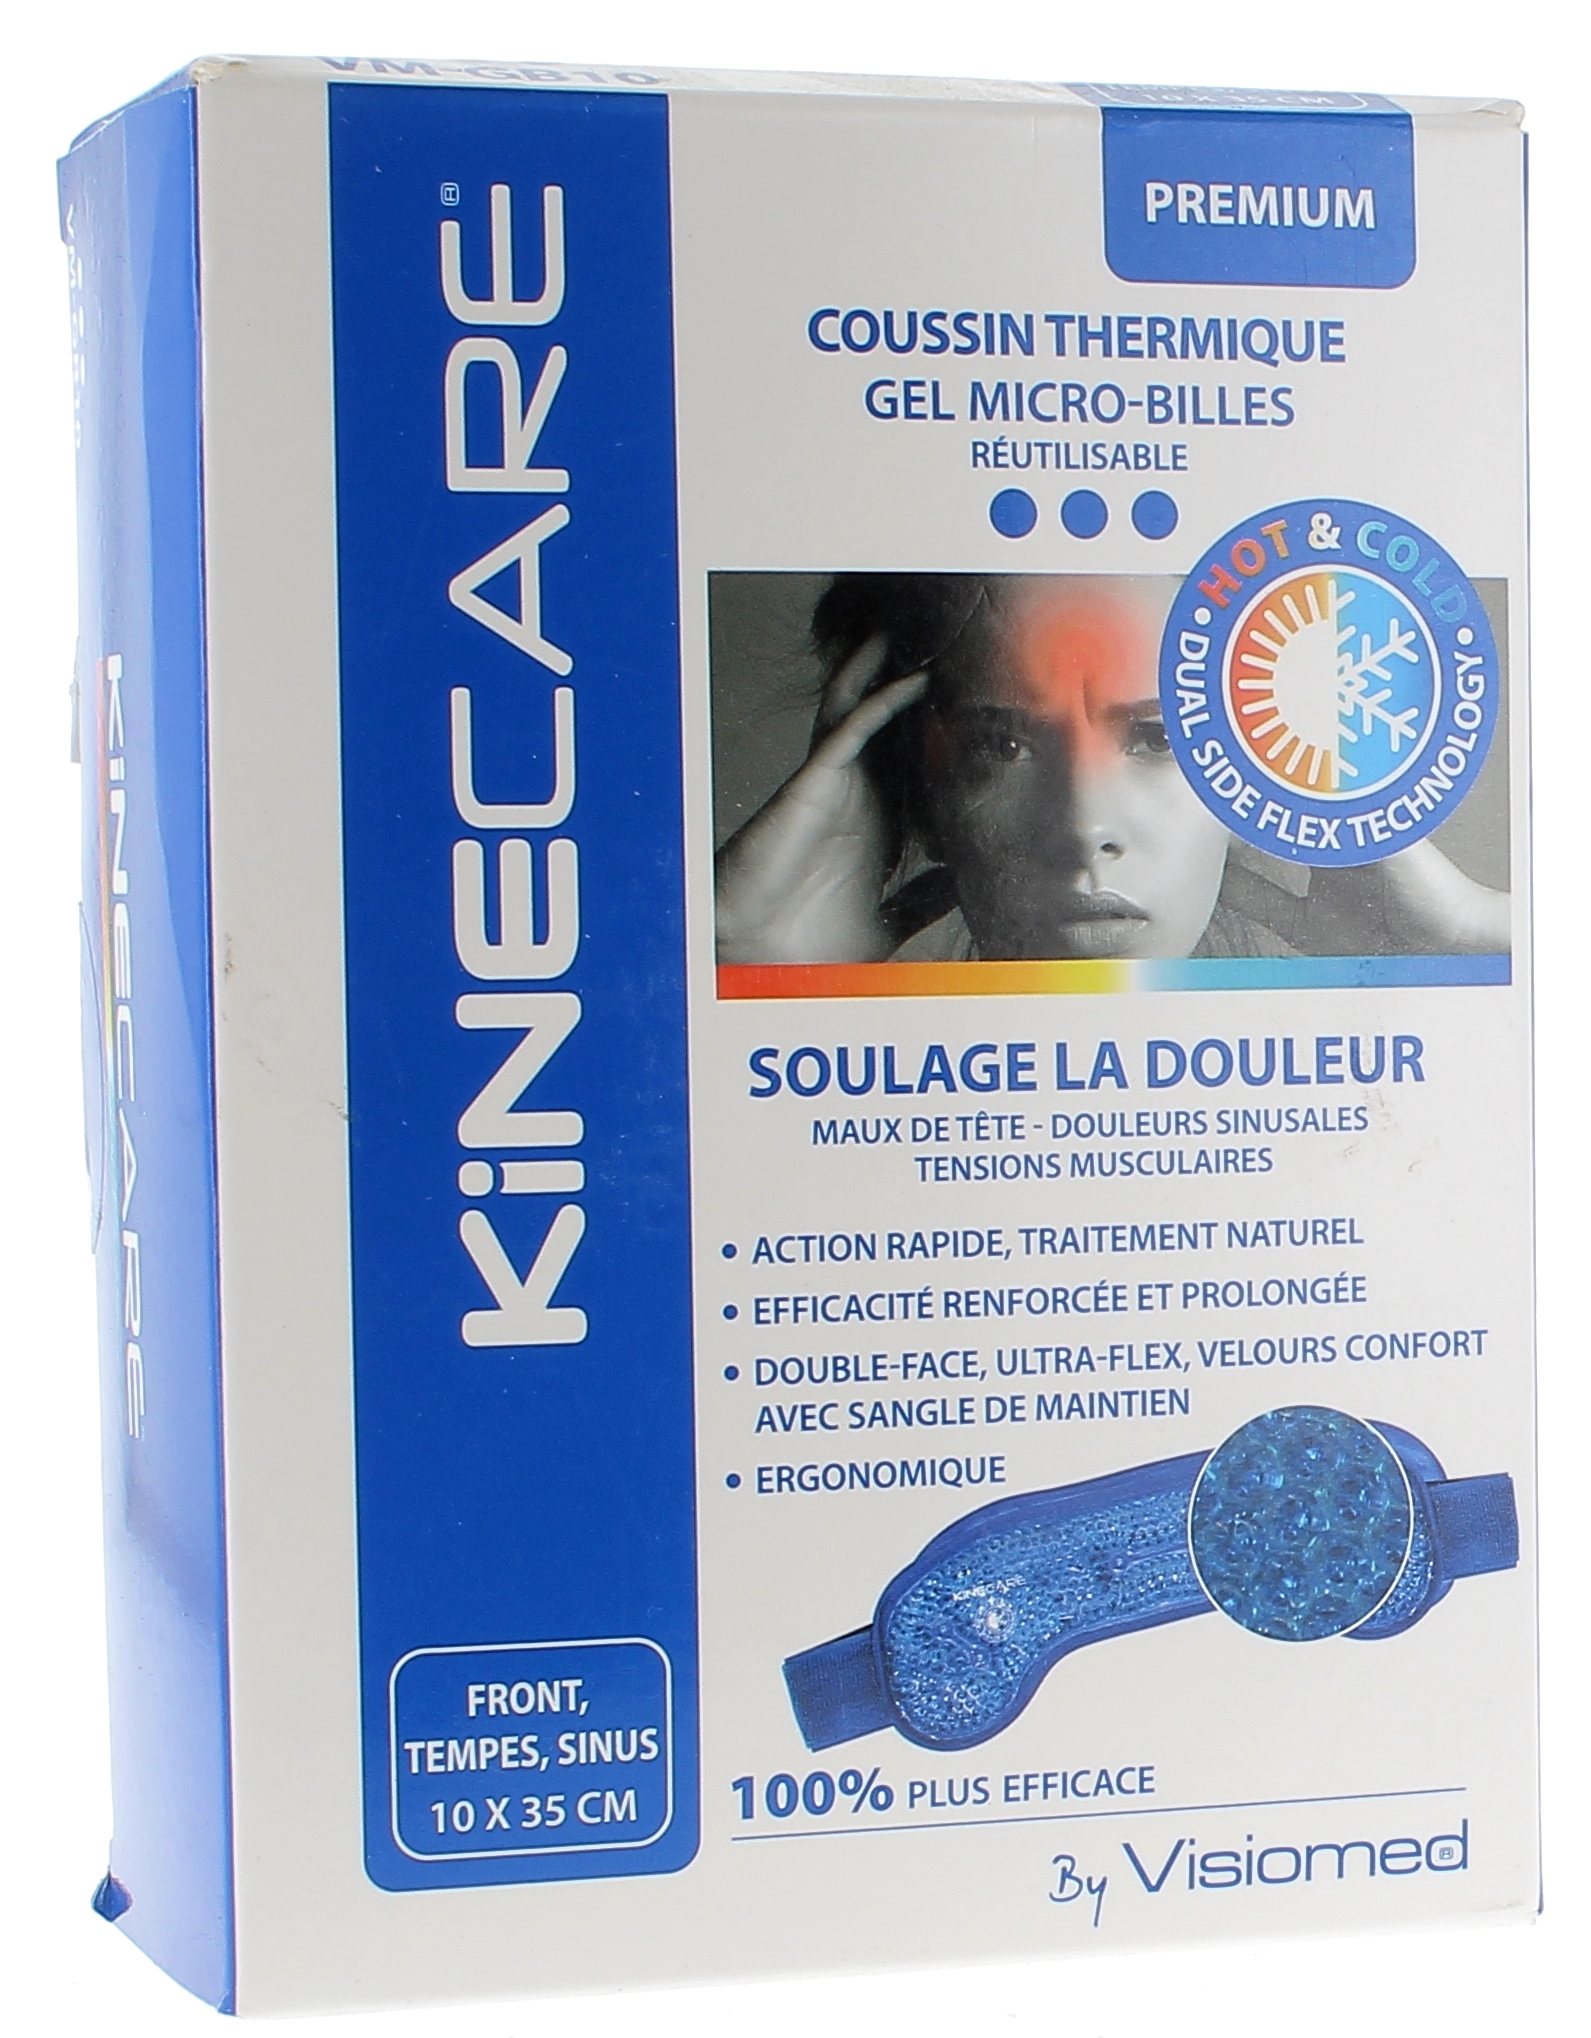 Coussin thermique chaud froid front tempes gel bille Kinecare - 10 x 35 cm